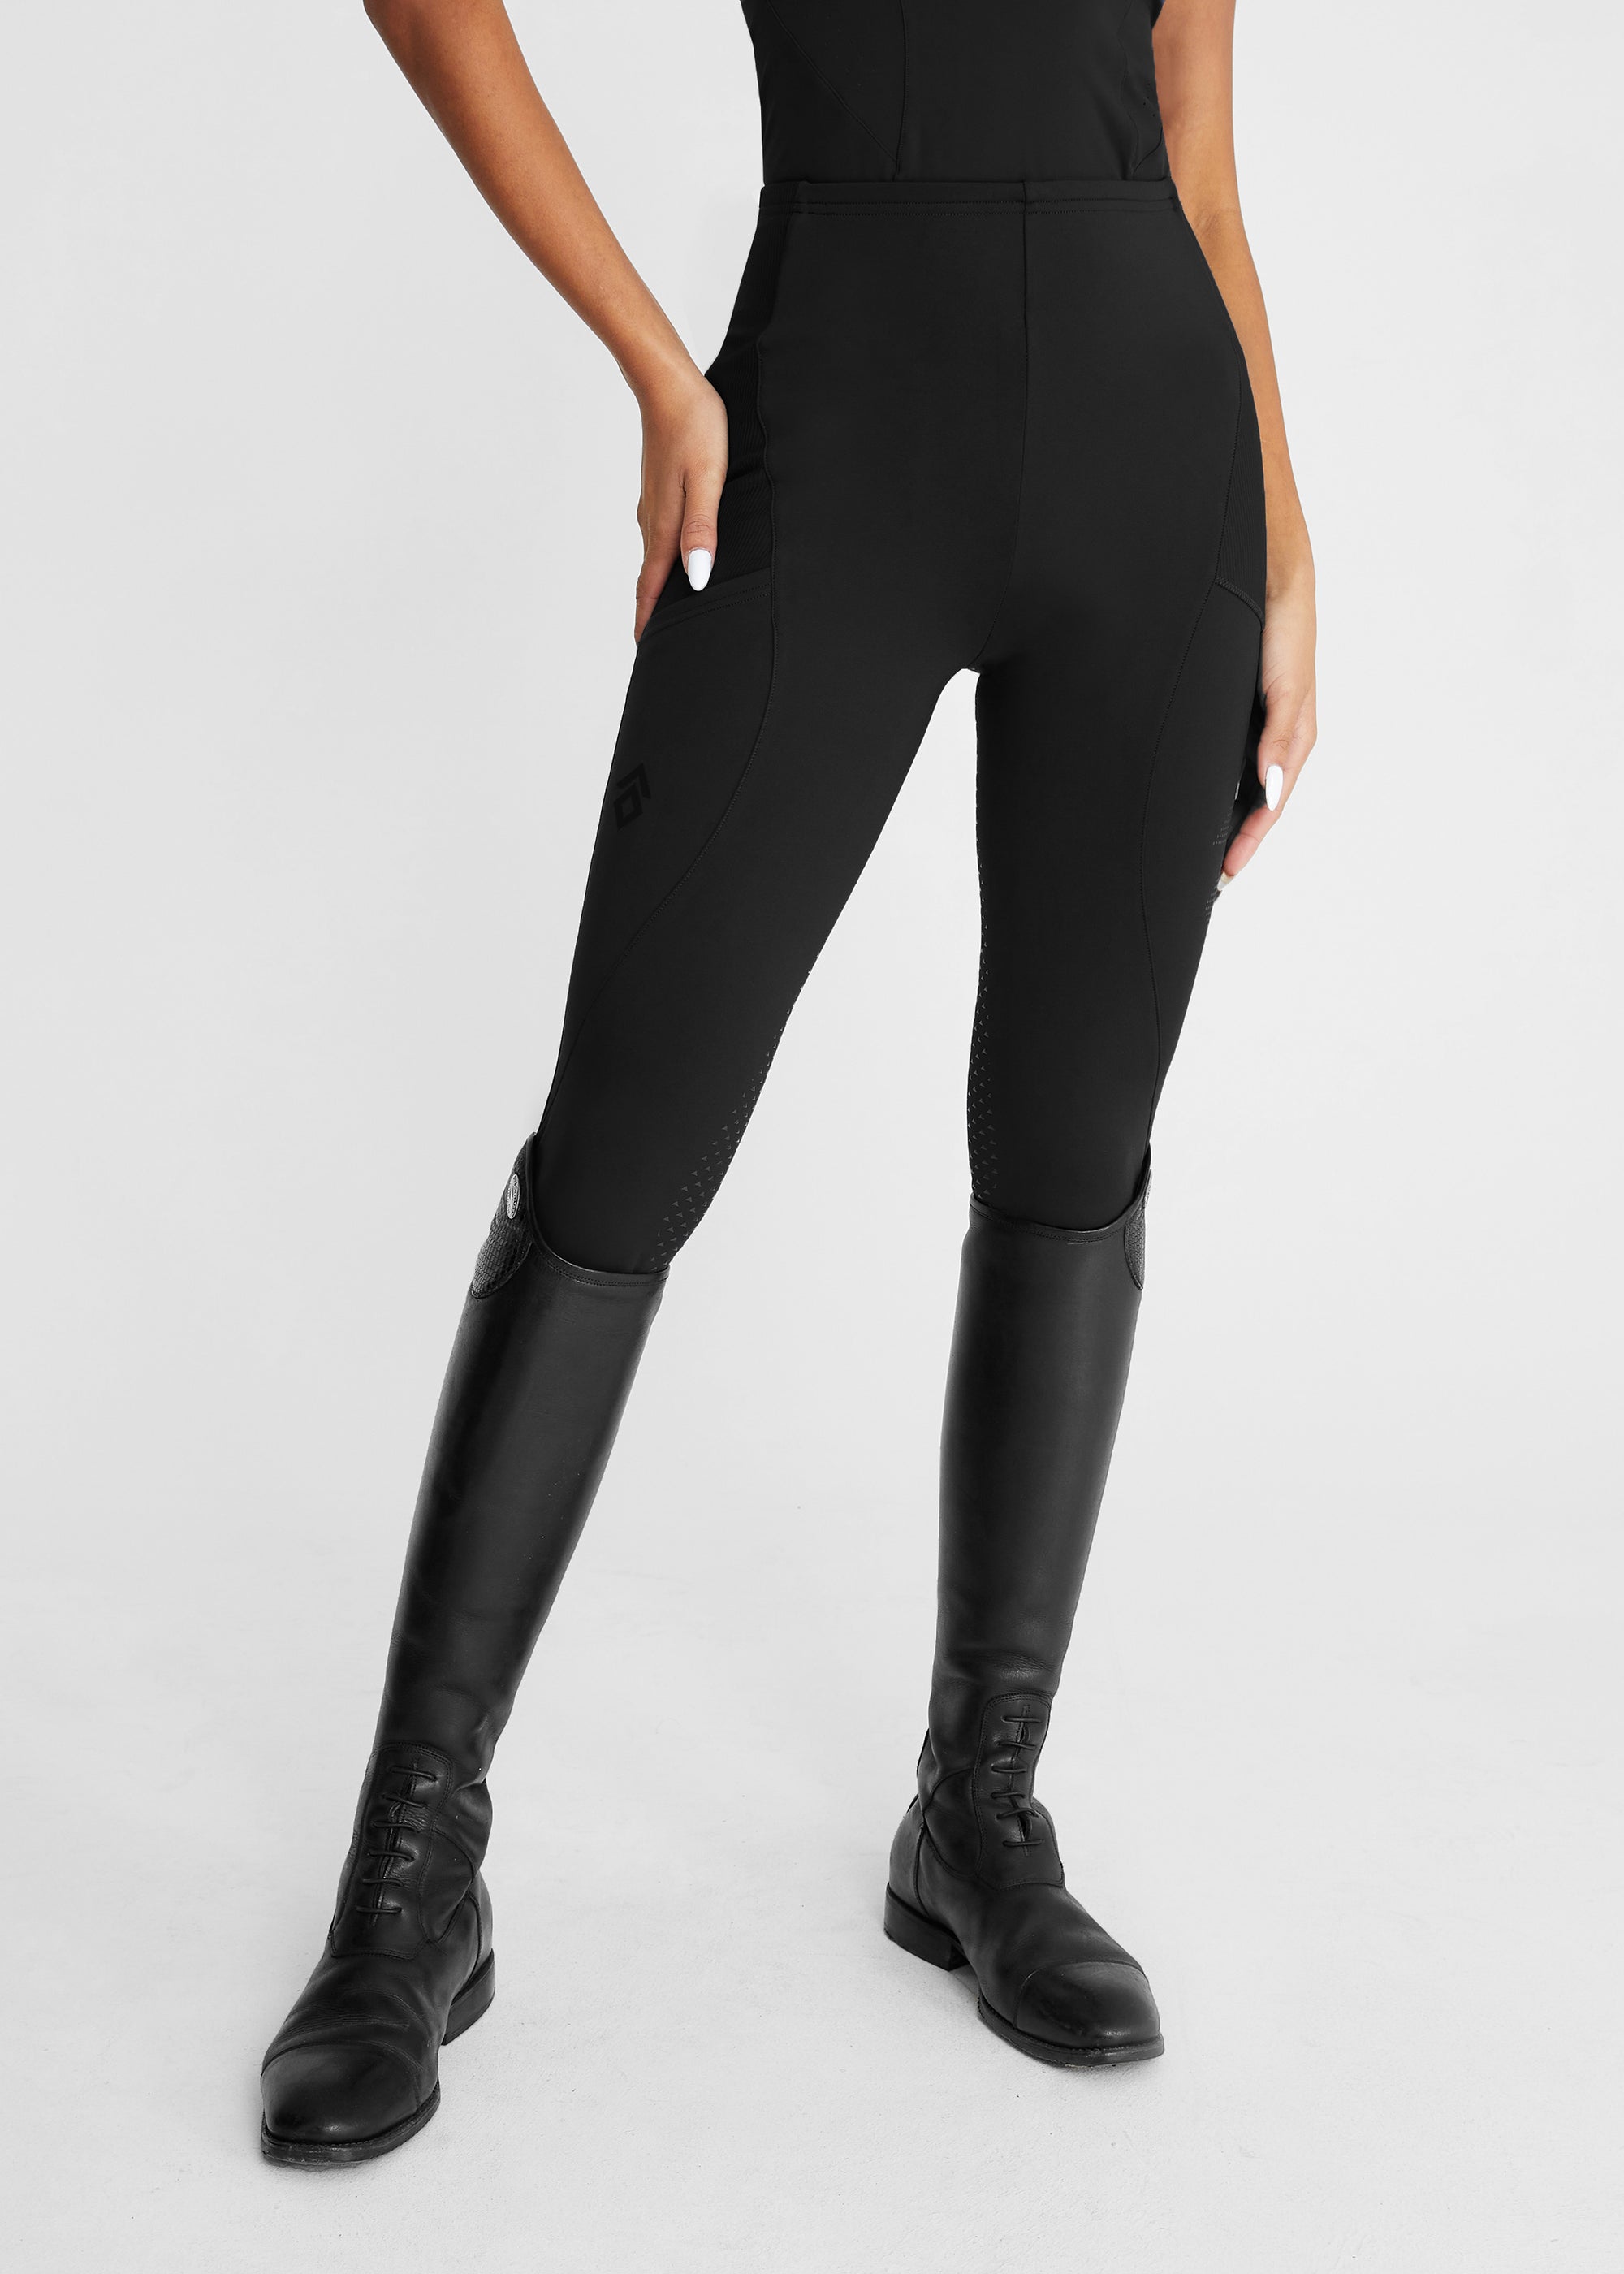 Aztec Diamond Core Full Seat Leggings in Black: Durable and Stylish Riding Legwear | Gee Gee Equine 